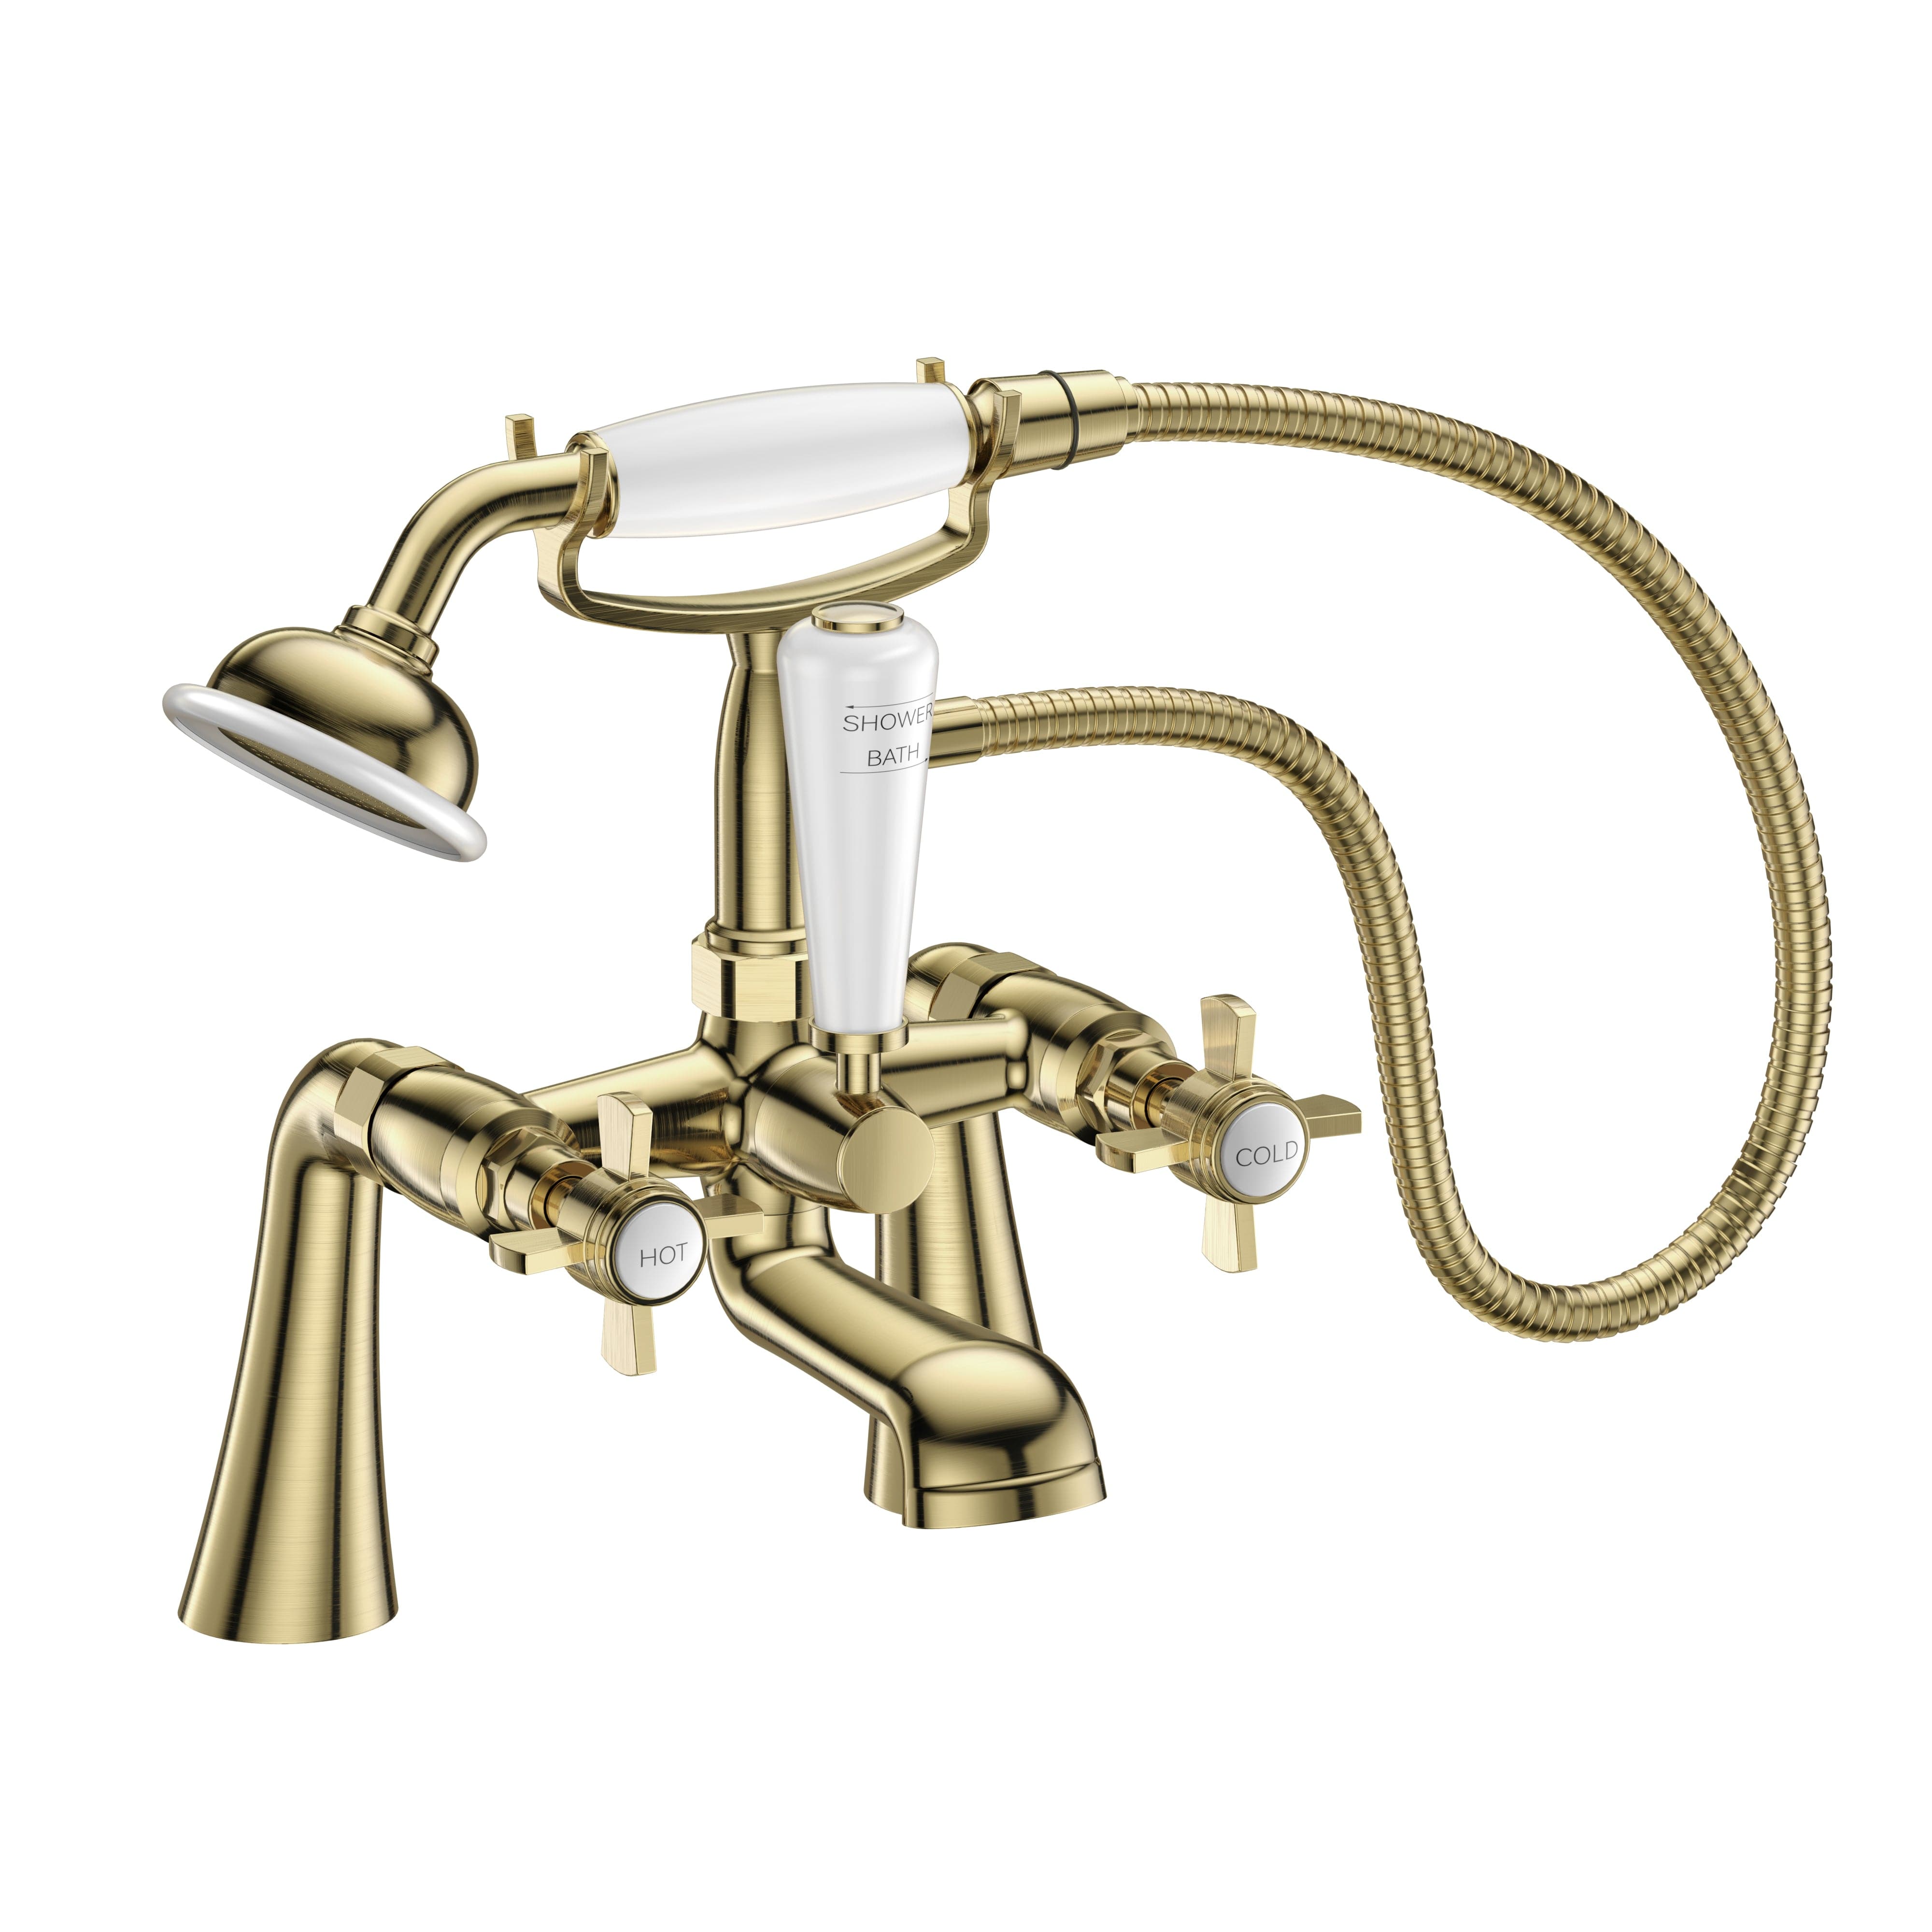 Regency Traditional Bath Shower Mixer Tap with Kit - Brushed Brass